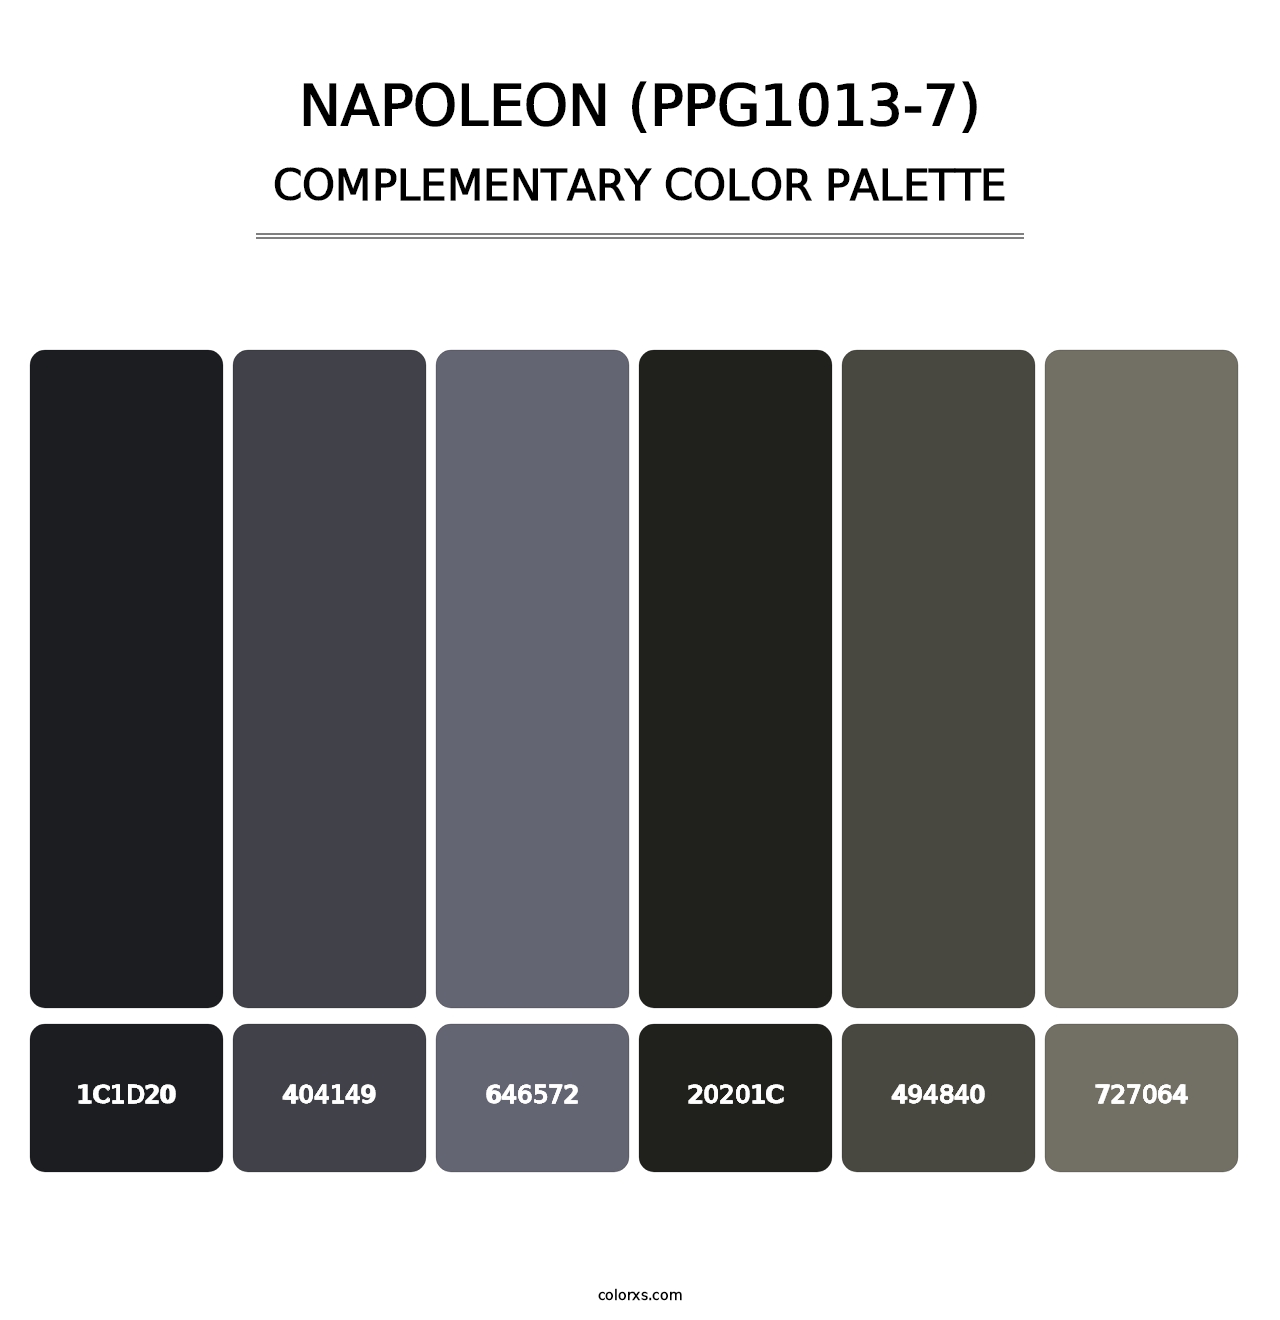 Napoleon (PPG1013-7) - Complementary Color Palette